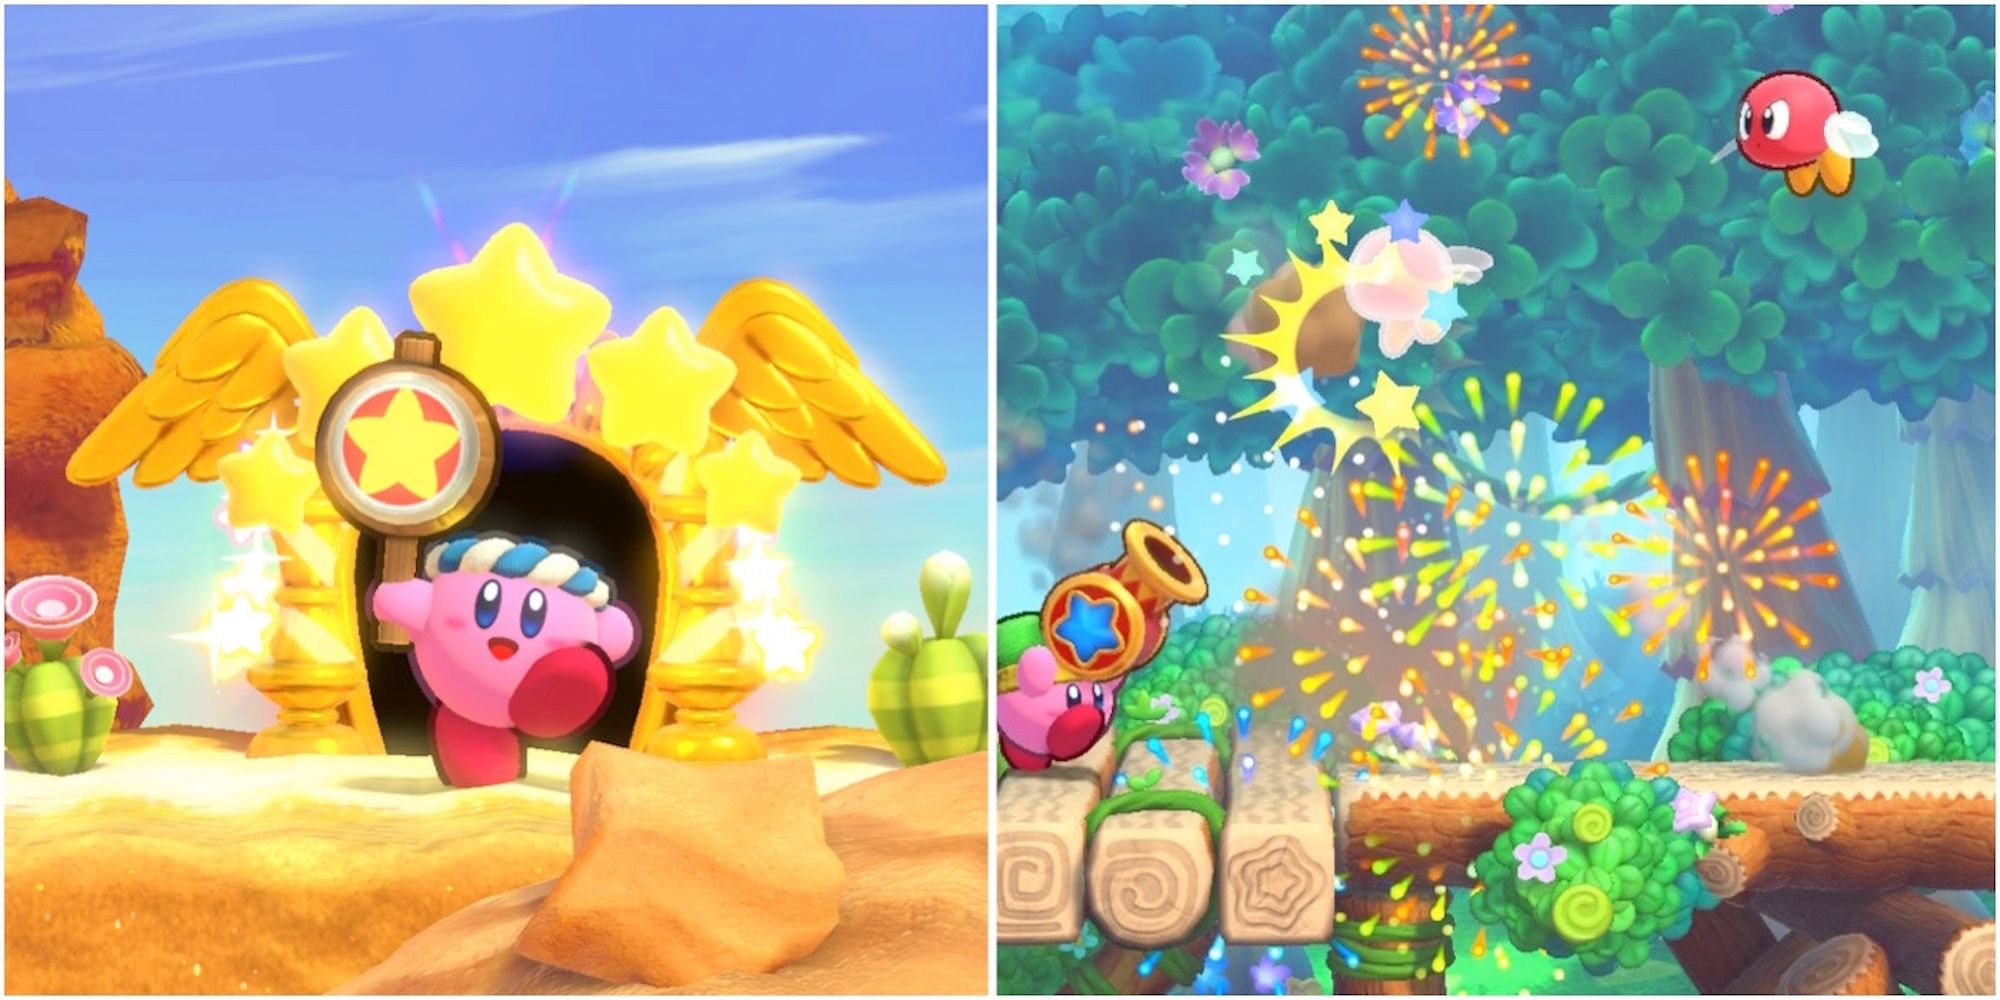 Hammer Kirby and fighting enemies in Kirby's Return to Dream Land Deluxe